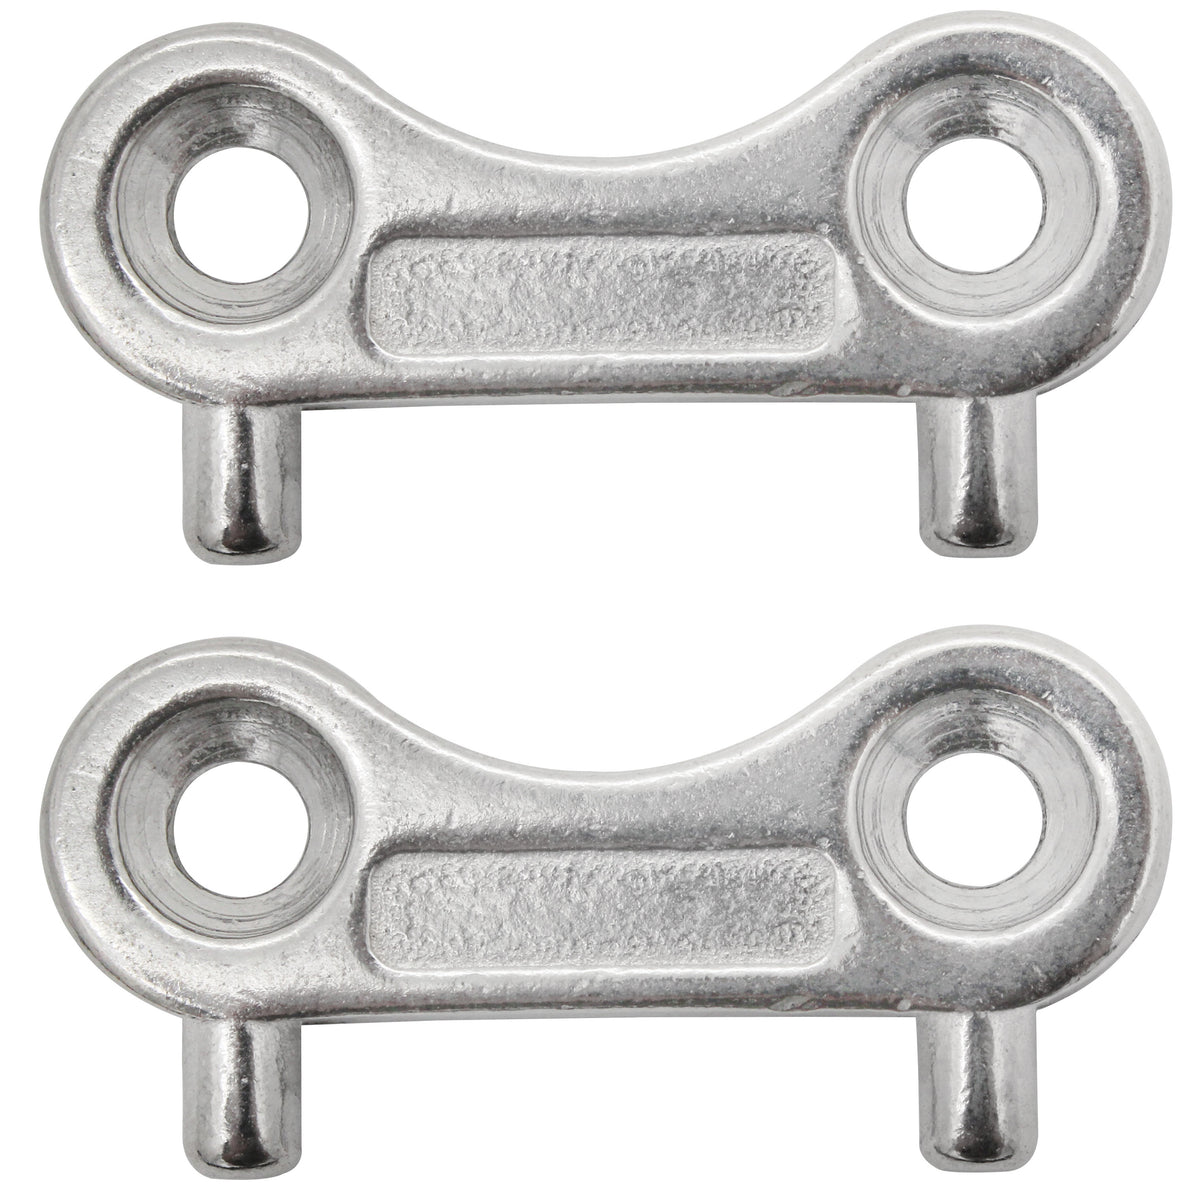 Extreme Max 3006.6777.2 Stainless Steel Deck Plate Key - 1-1/4", Value 2-Pack